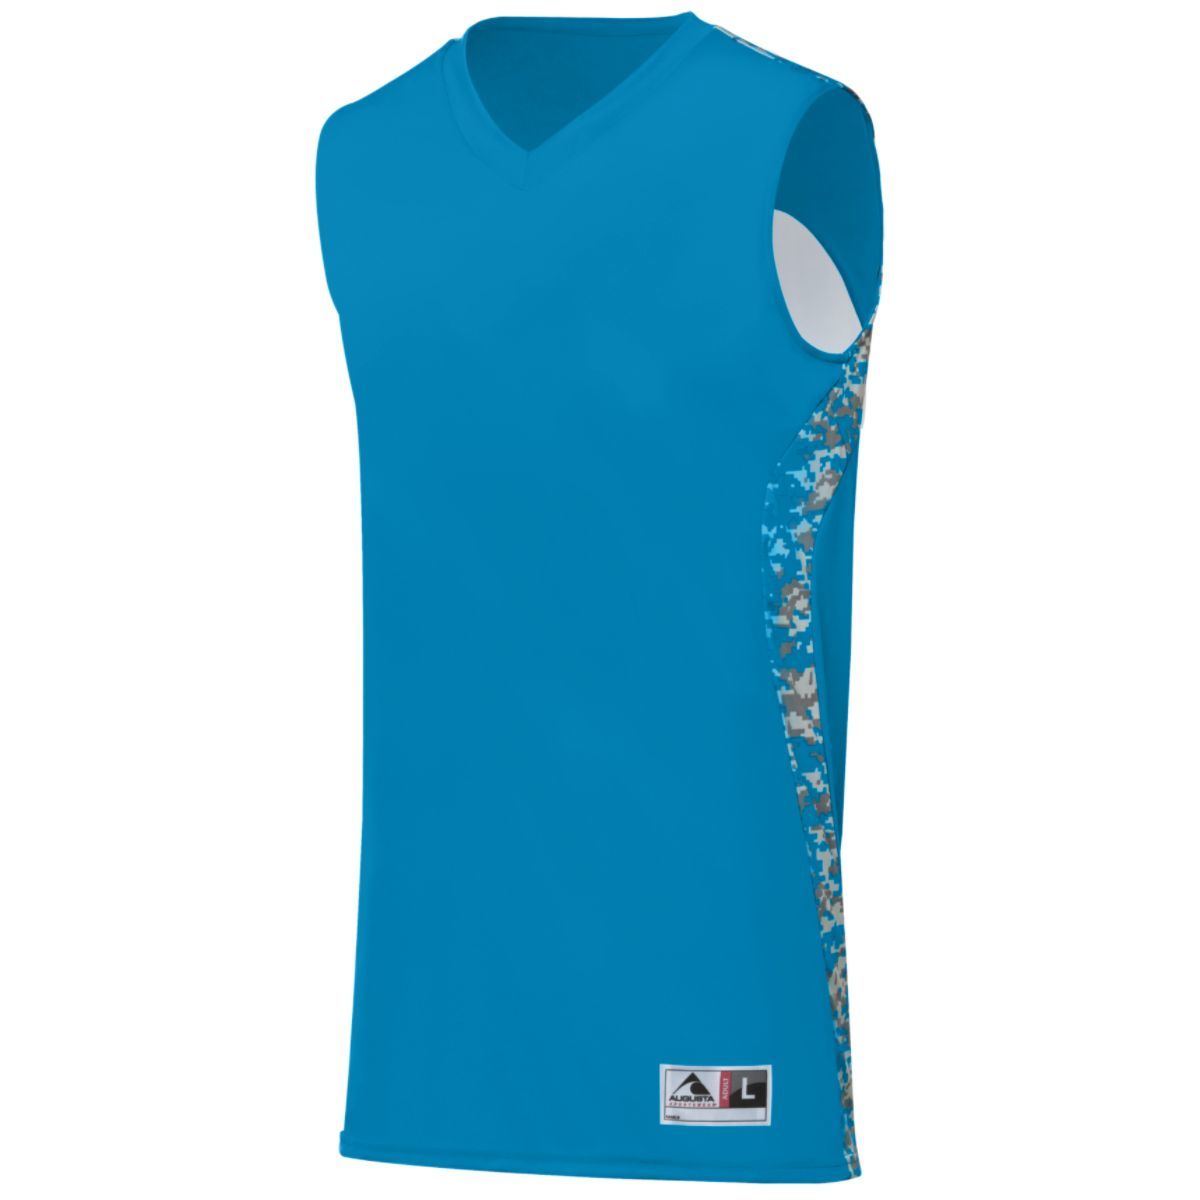 Augusta Sportswear Hook Shot Reversible Jersey in Power Blue/Power Blue Digi  -Part of the Adult, Adult-Jersey, Augusta-Products, Basketball, Shirts, All-Sports, All-Sports-1 product lines at KanaleyCreations.com